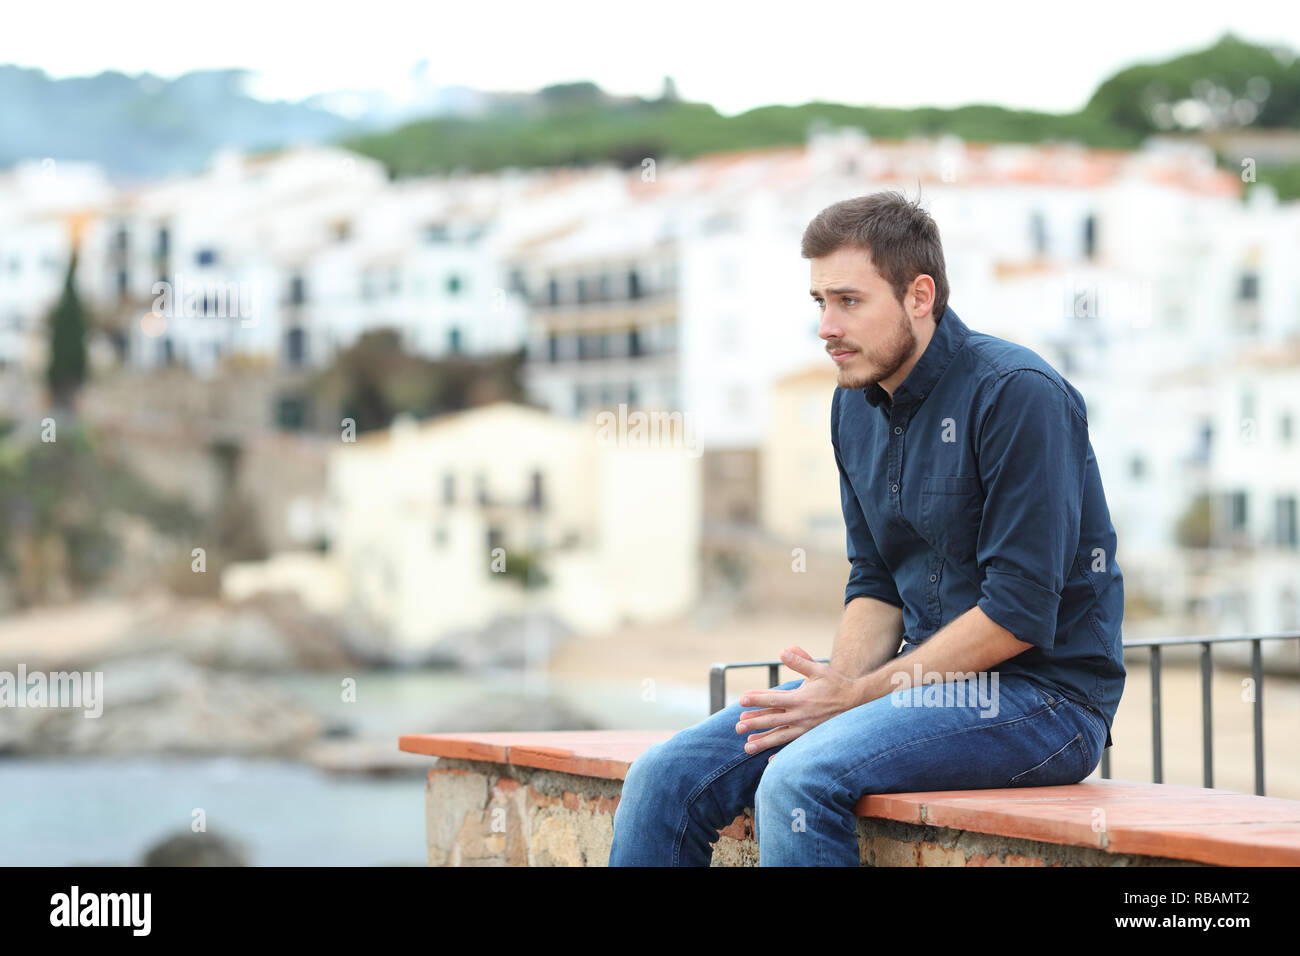 Worried man looking away sitting on a ledge in a coast town Stock Photo